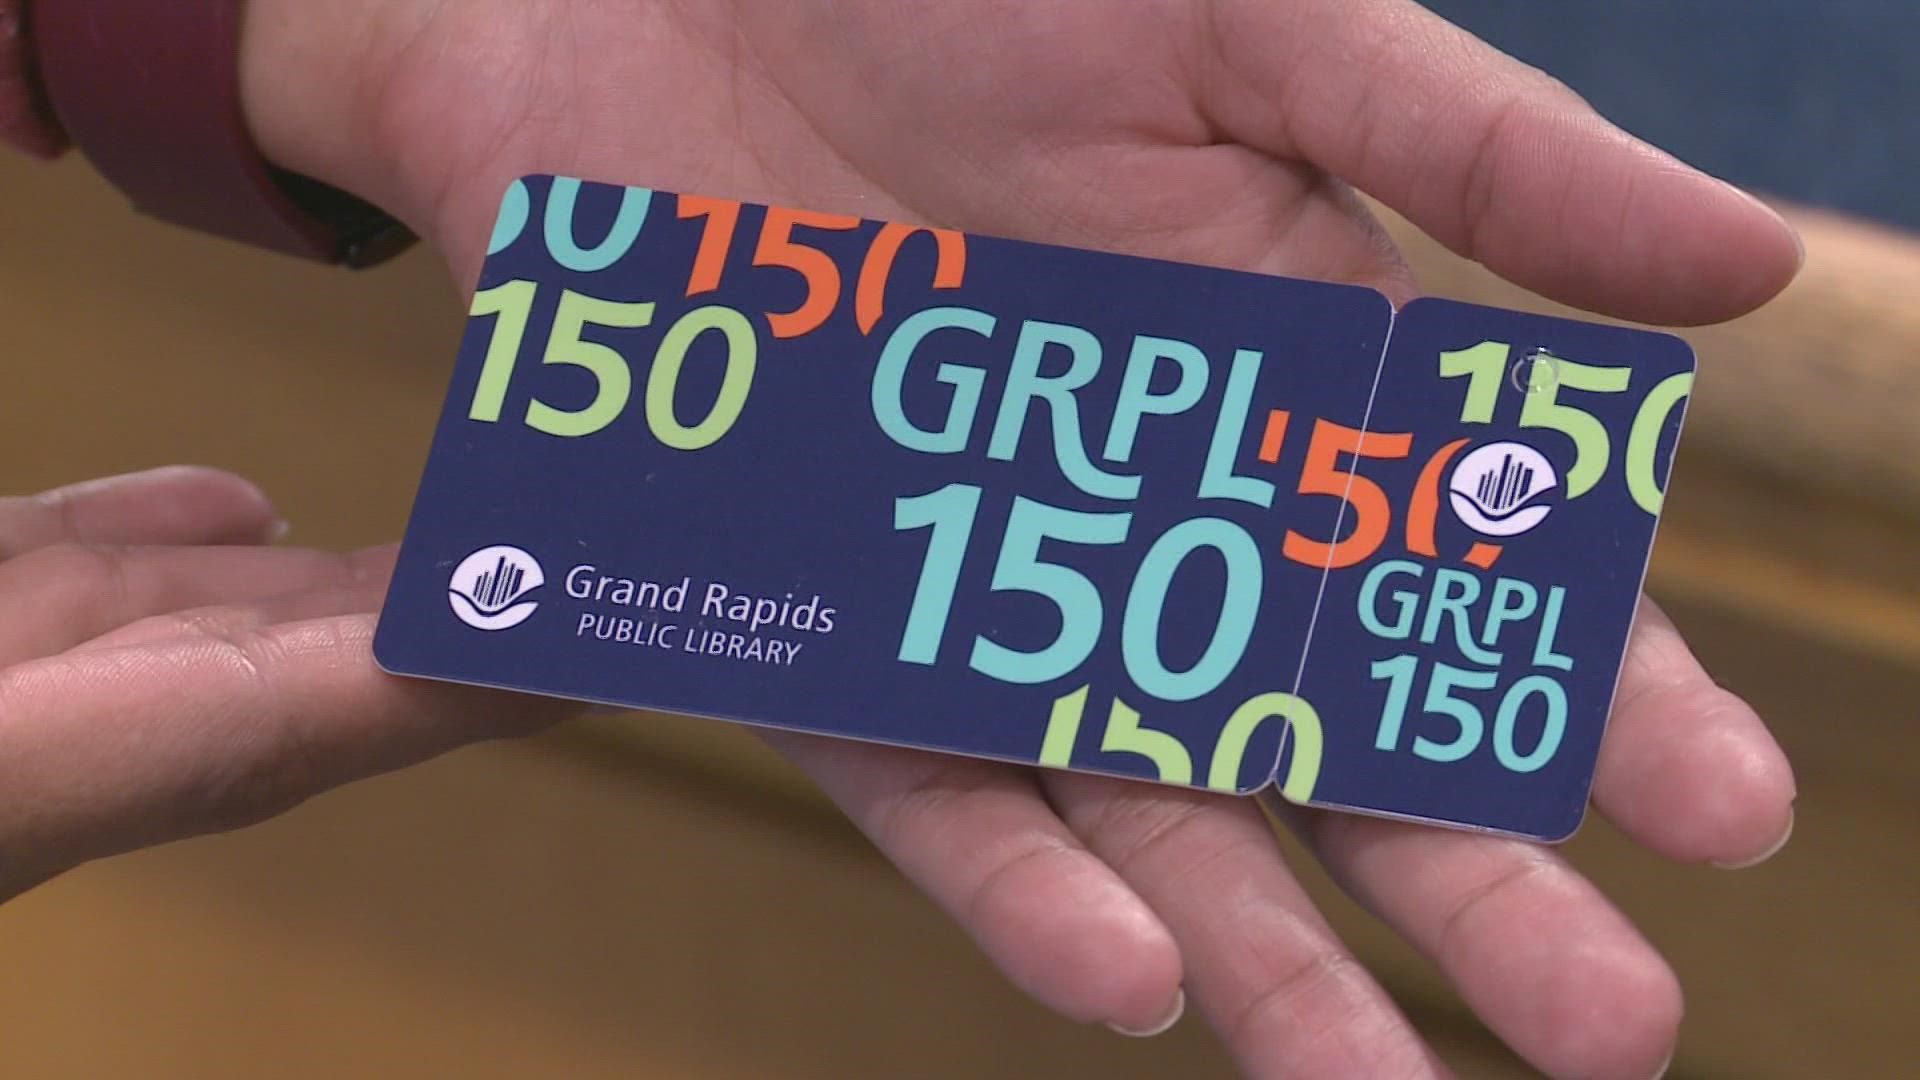 The Grand Rapids Public Library wants to sign up 1,500 new cardholders.